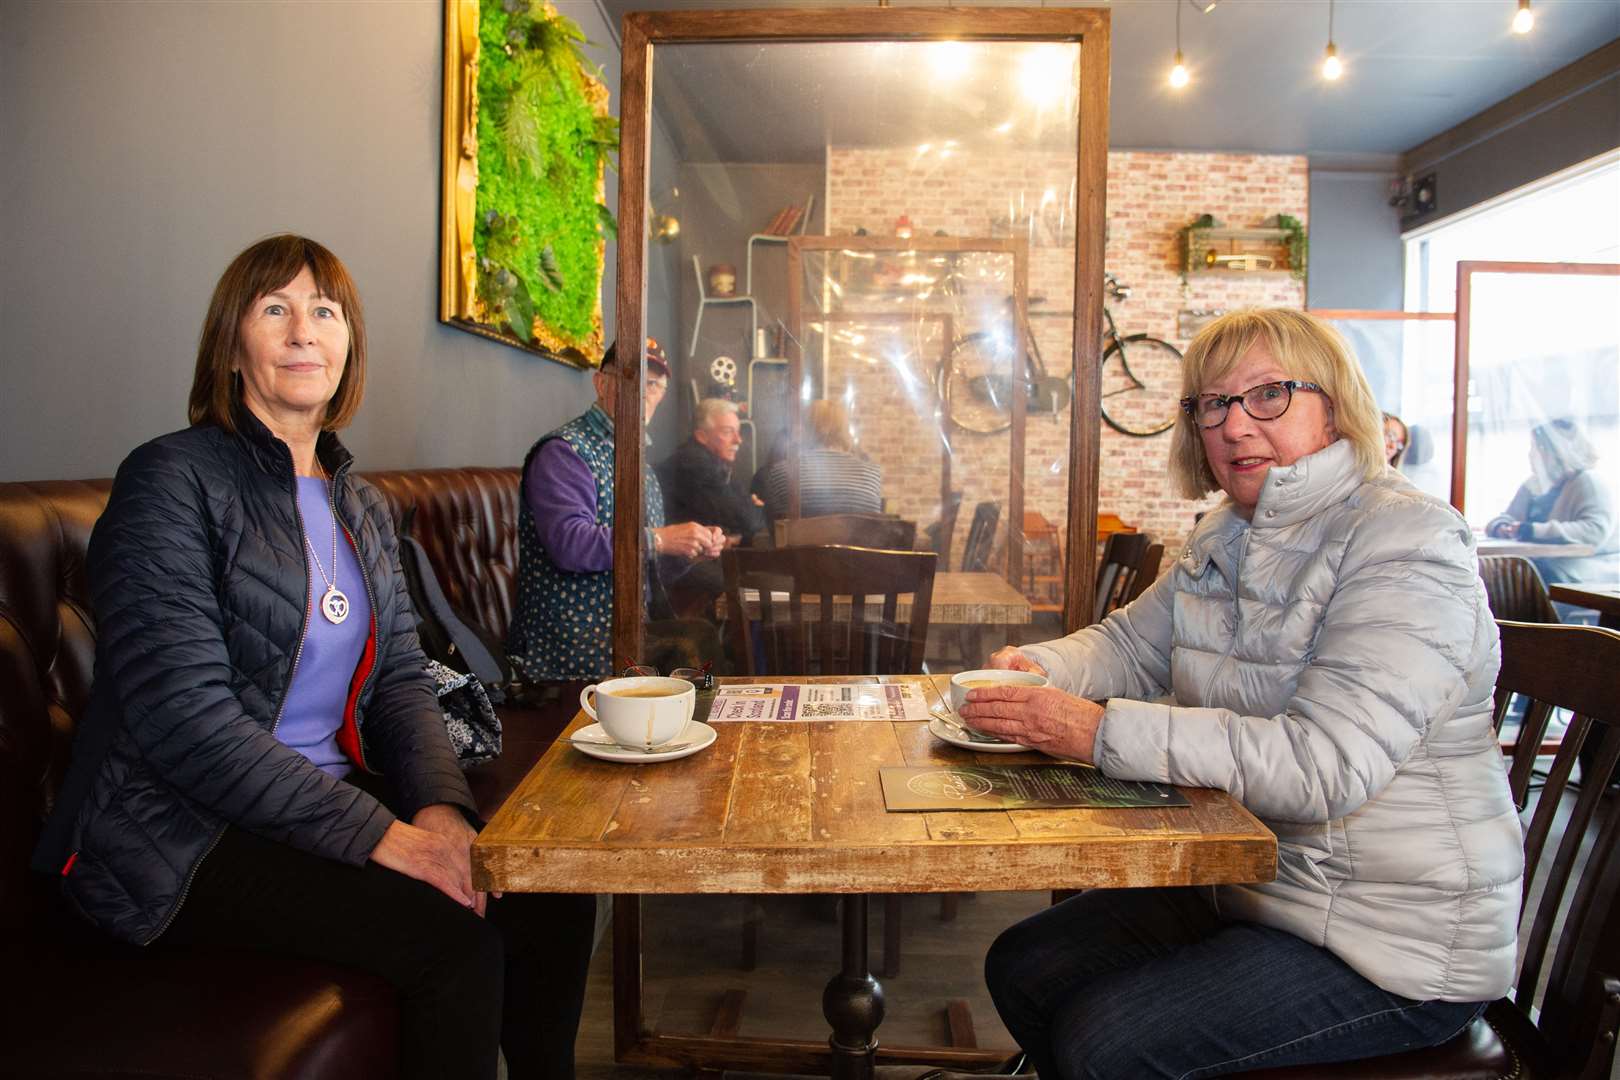 Jan Little (left) and mum Irene Williamson, from Elgin, enjoying a catch-up over coffee at Planta in Elgin. Picture: Daniel Forsyth.